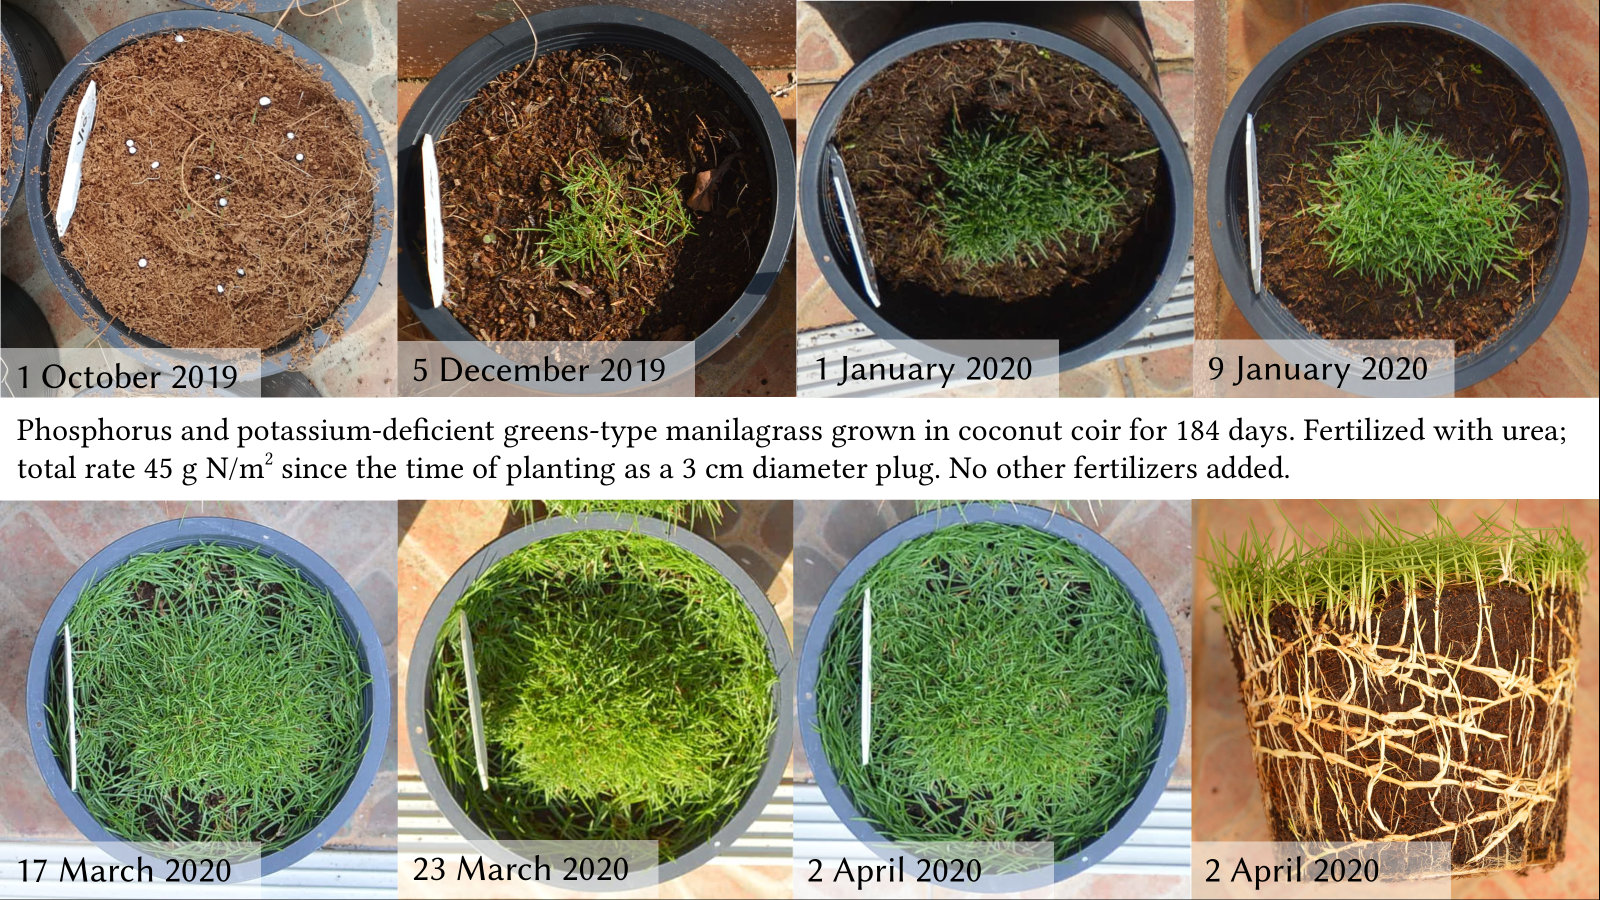 sequence of photos showing greens-type manilagrass fertilized with N